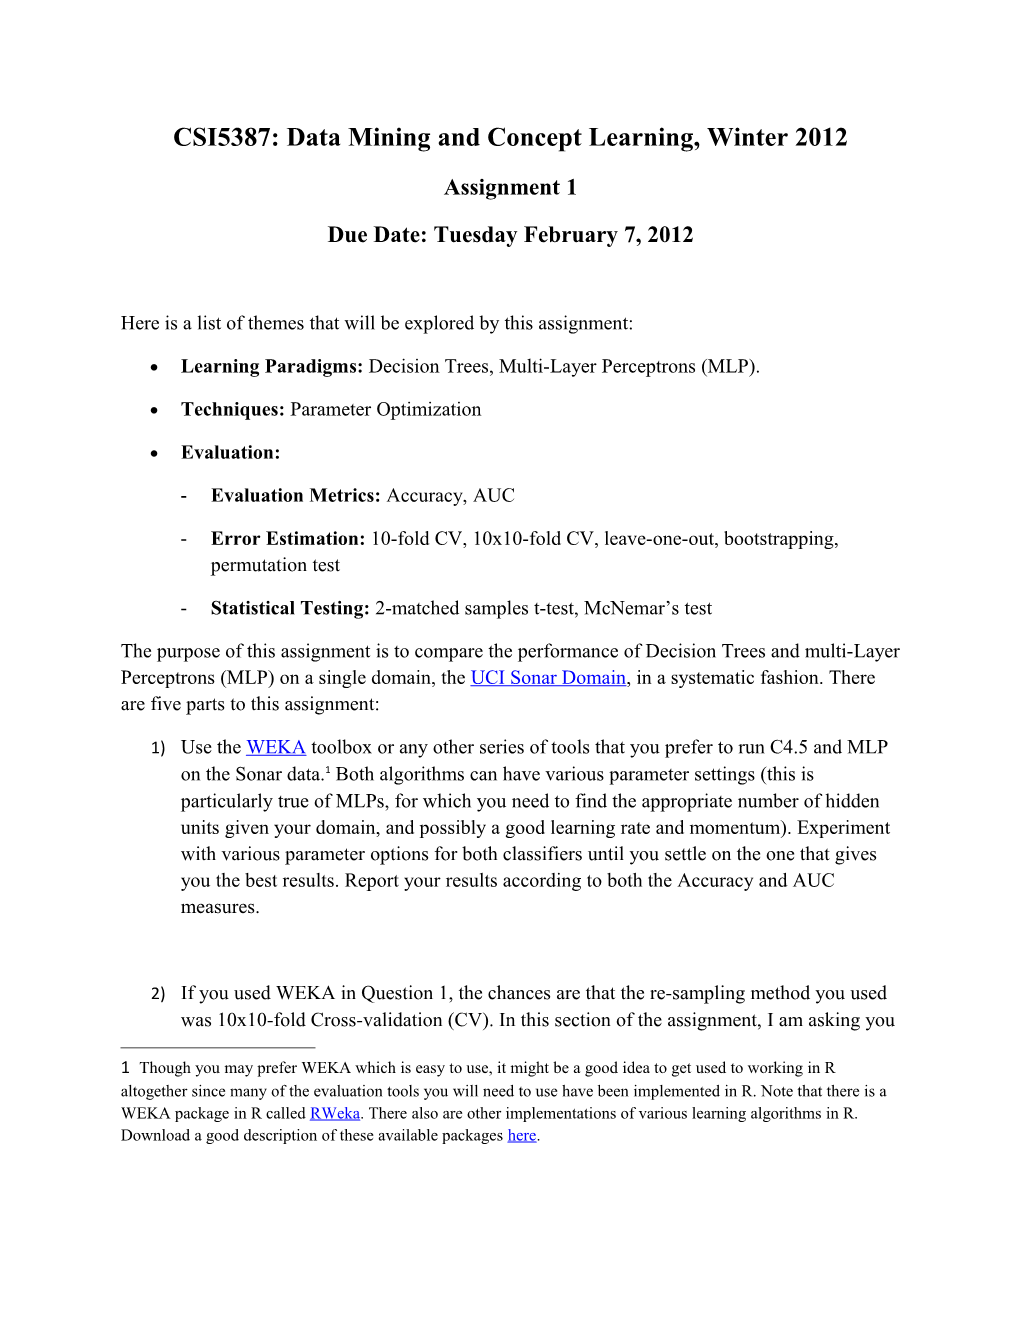 CSI5387: Data Mining and Concept Learning, Winter 2012